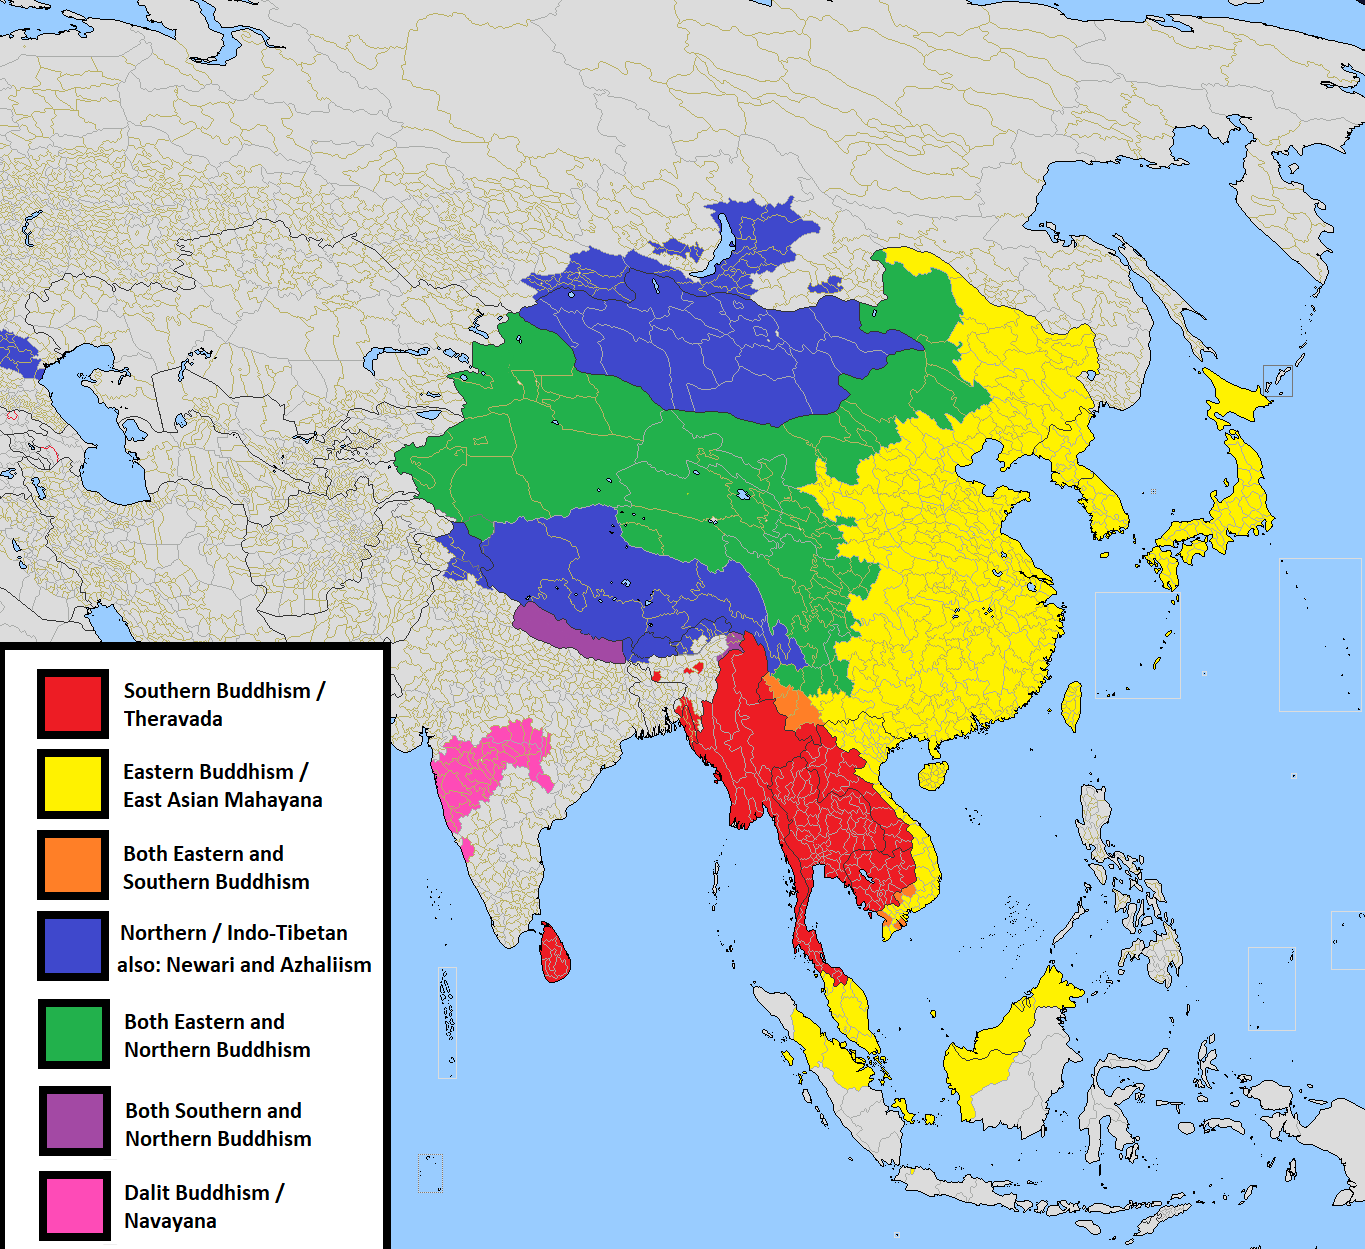 Map showing the areas of the three major Buddhist sects: Mahayana, Theravada, and Vajrayana